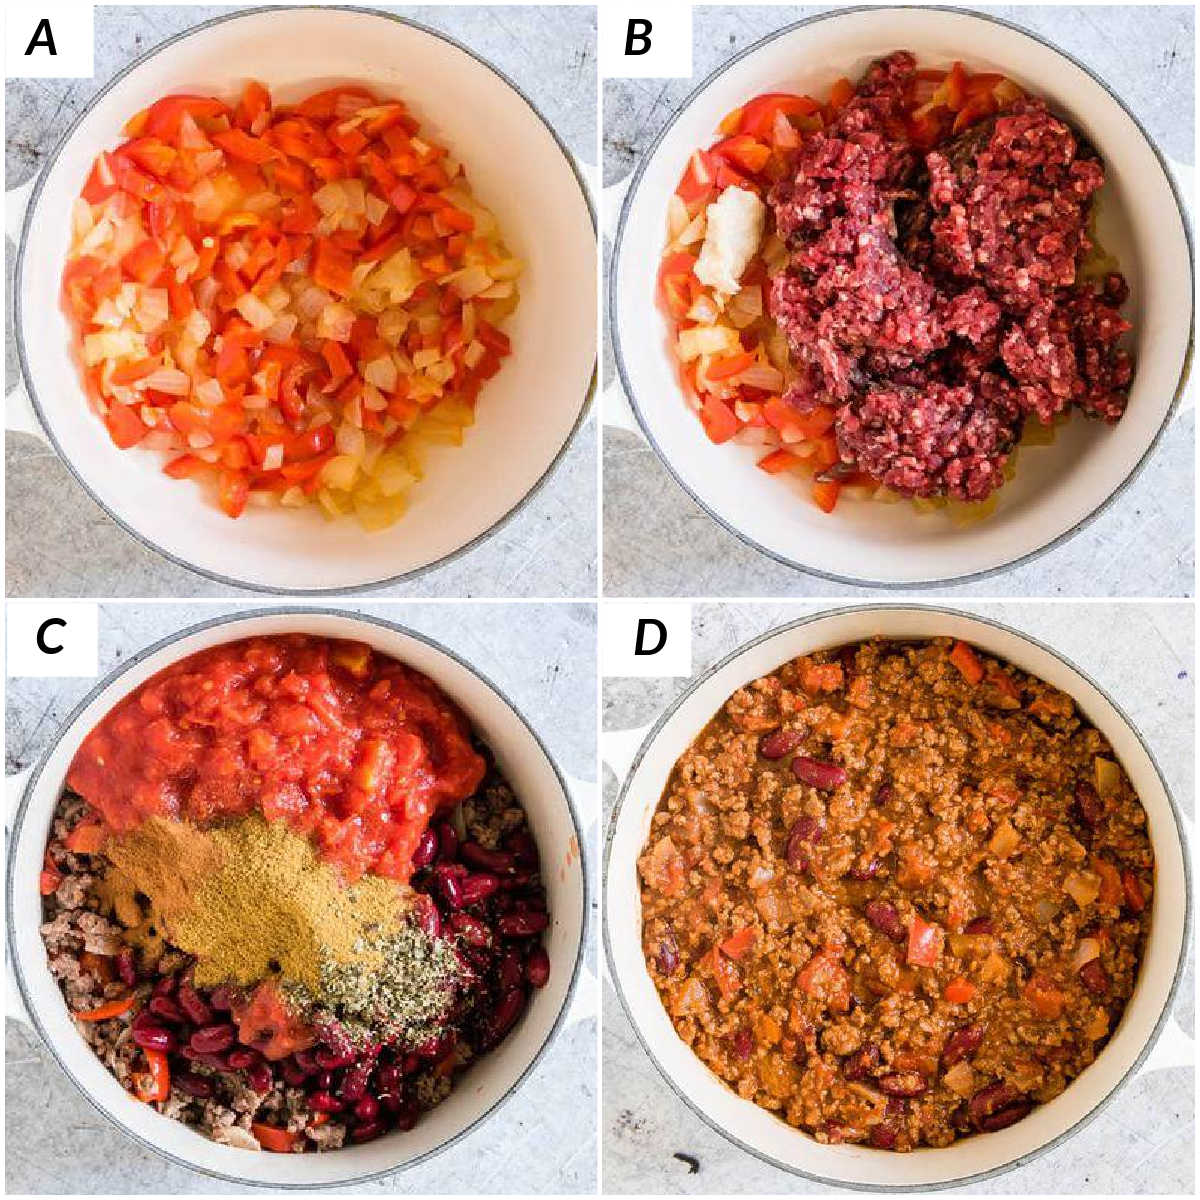 image collage showing the steps for making venison chili